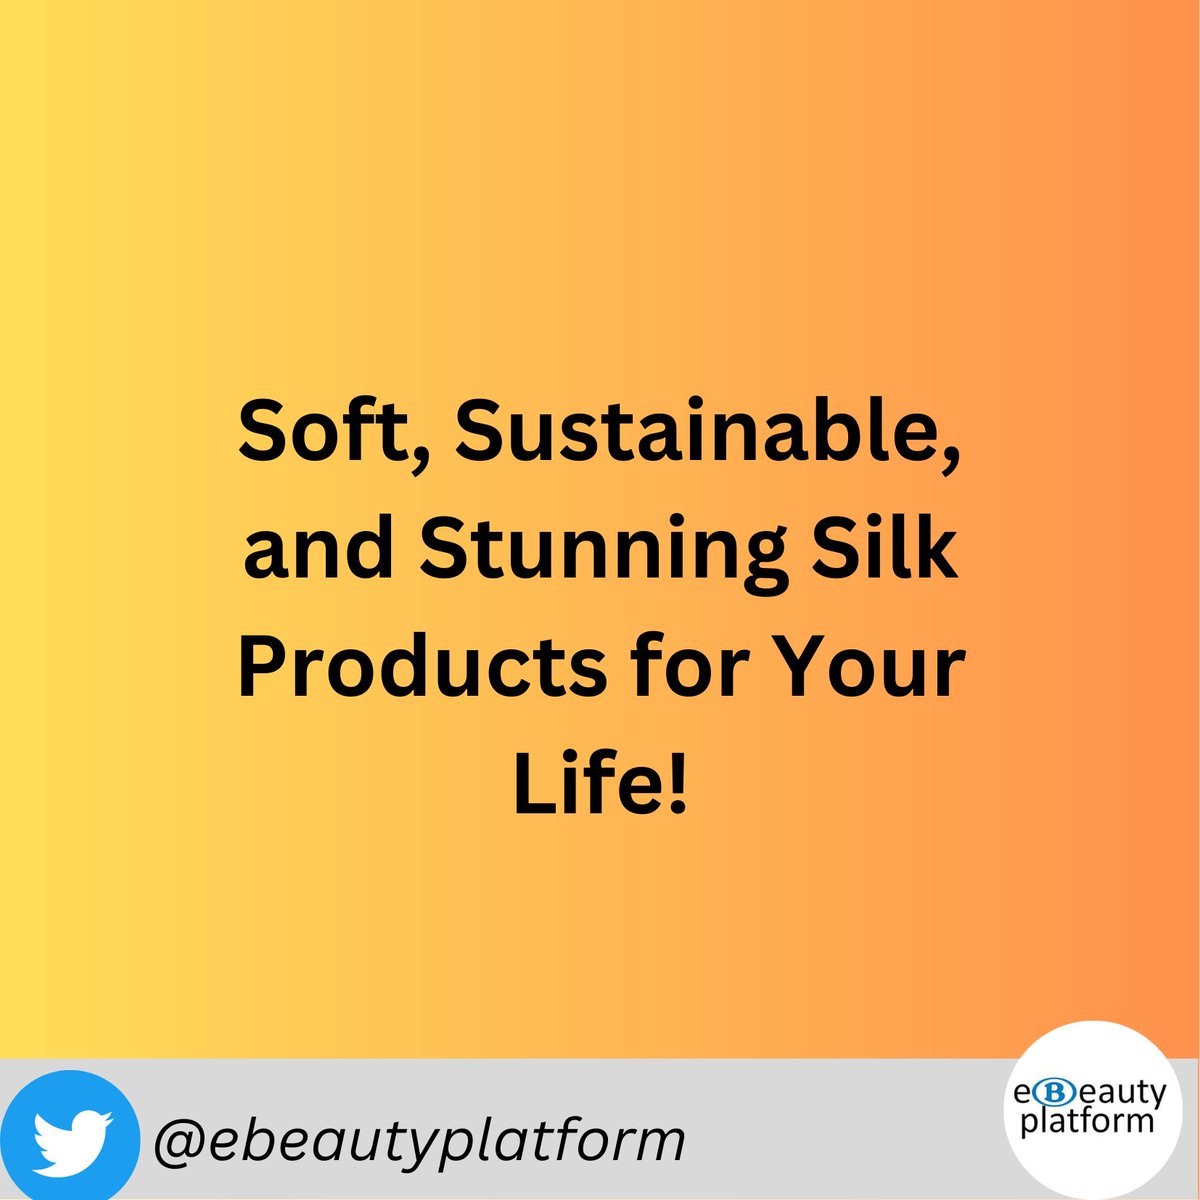 🌟  Soft, Sustainable, and Stunning Silk Products for Your Life! 🌟 From sleepwear to bedding, we've got you covered! Check out bit.ly/3ZVgsE8 our incredible silk products today. #Slipintosoft #silkproducts
Dort
Ramadan Mubarak
Chapter 20
taehyun
Angels
#Trendy
#style